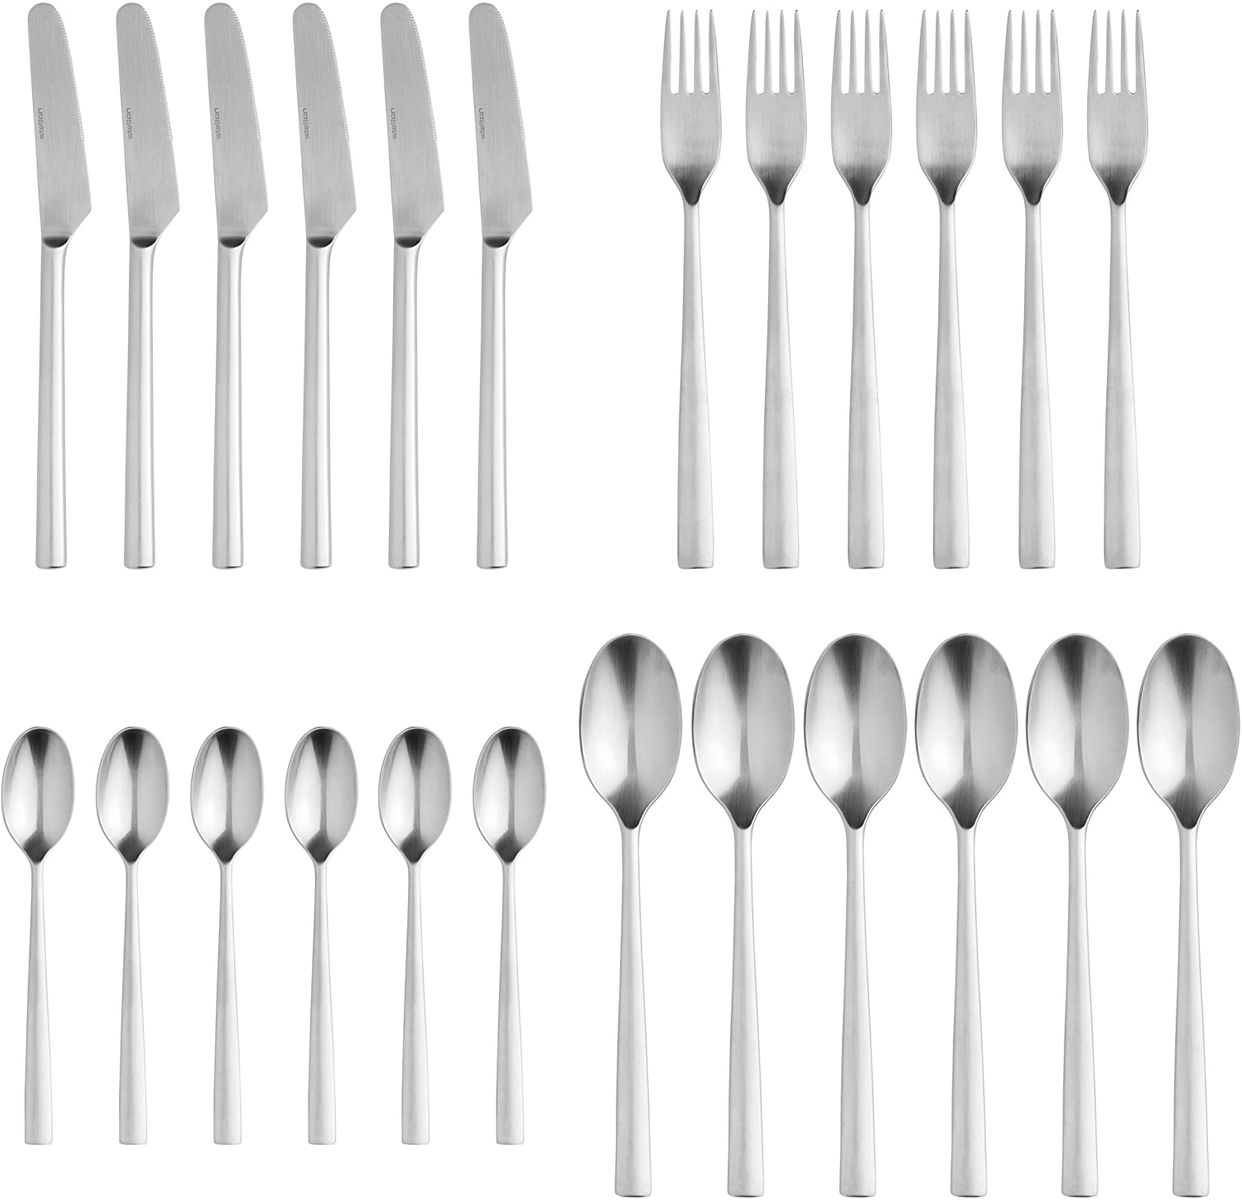 Stelton Chaco cutlery set, 24 pieces